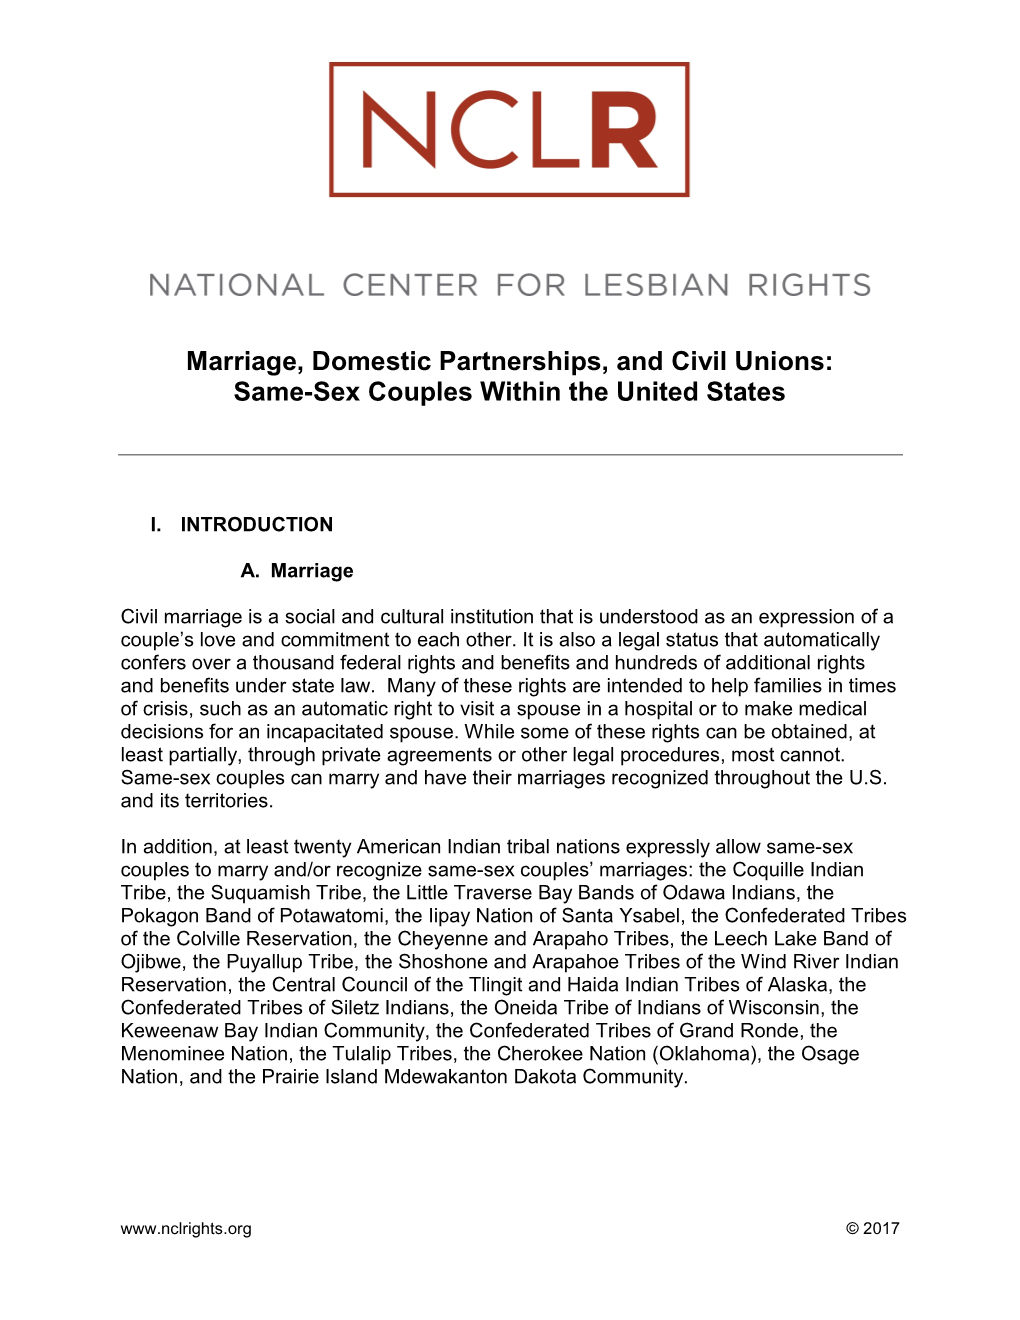 Marriage, Domestic Partnerships, and Civil Unions: Same-Sex Couples Within the United States